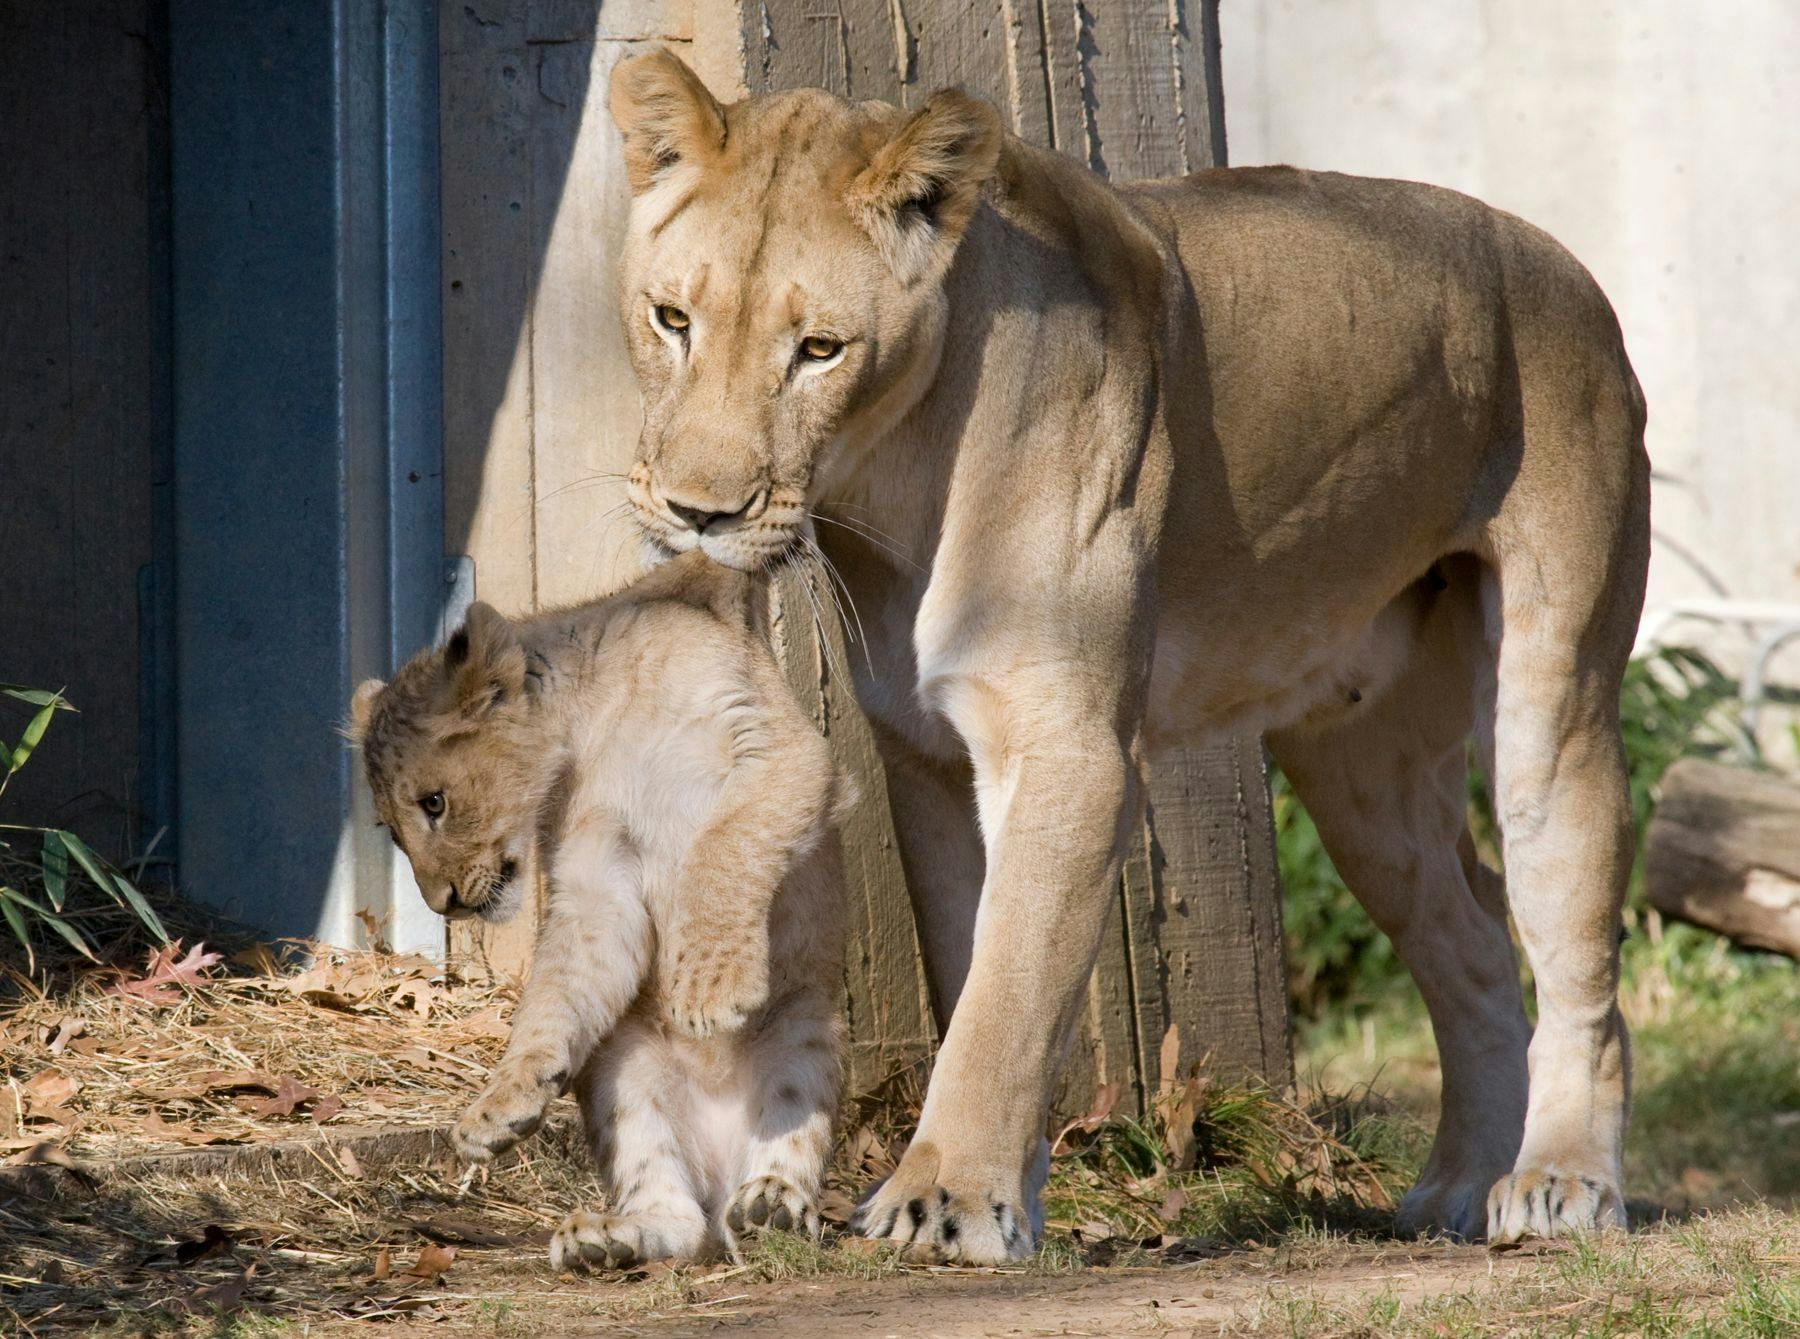 Naba, with one of her cubs in 2011 (Photo courtesy of Smithsonian’s National Zoo and Conservation Biology).